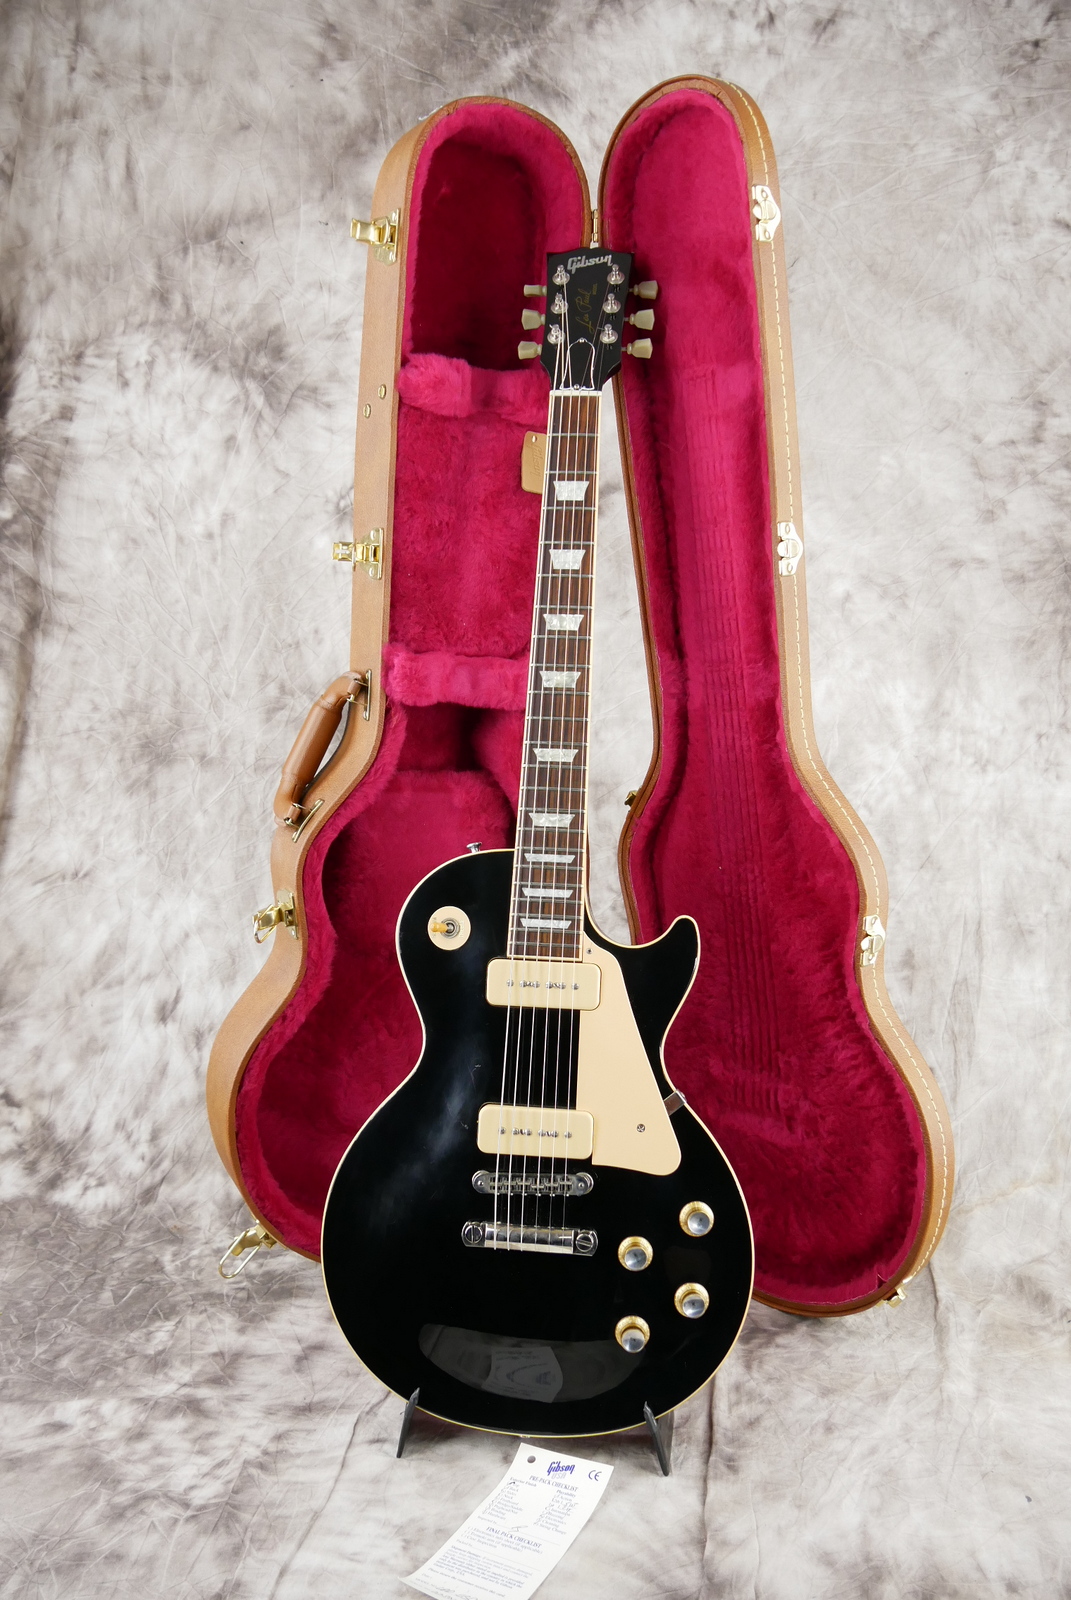 Gibson_Les_Paul_Deluxe_limited_edtion_black_2000-015.JPG